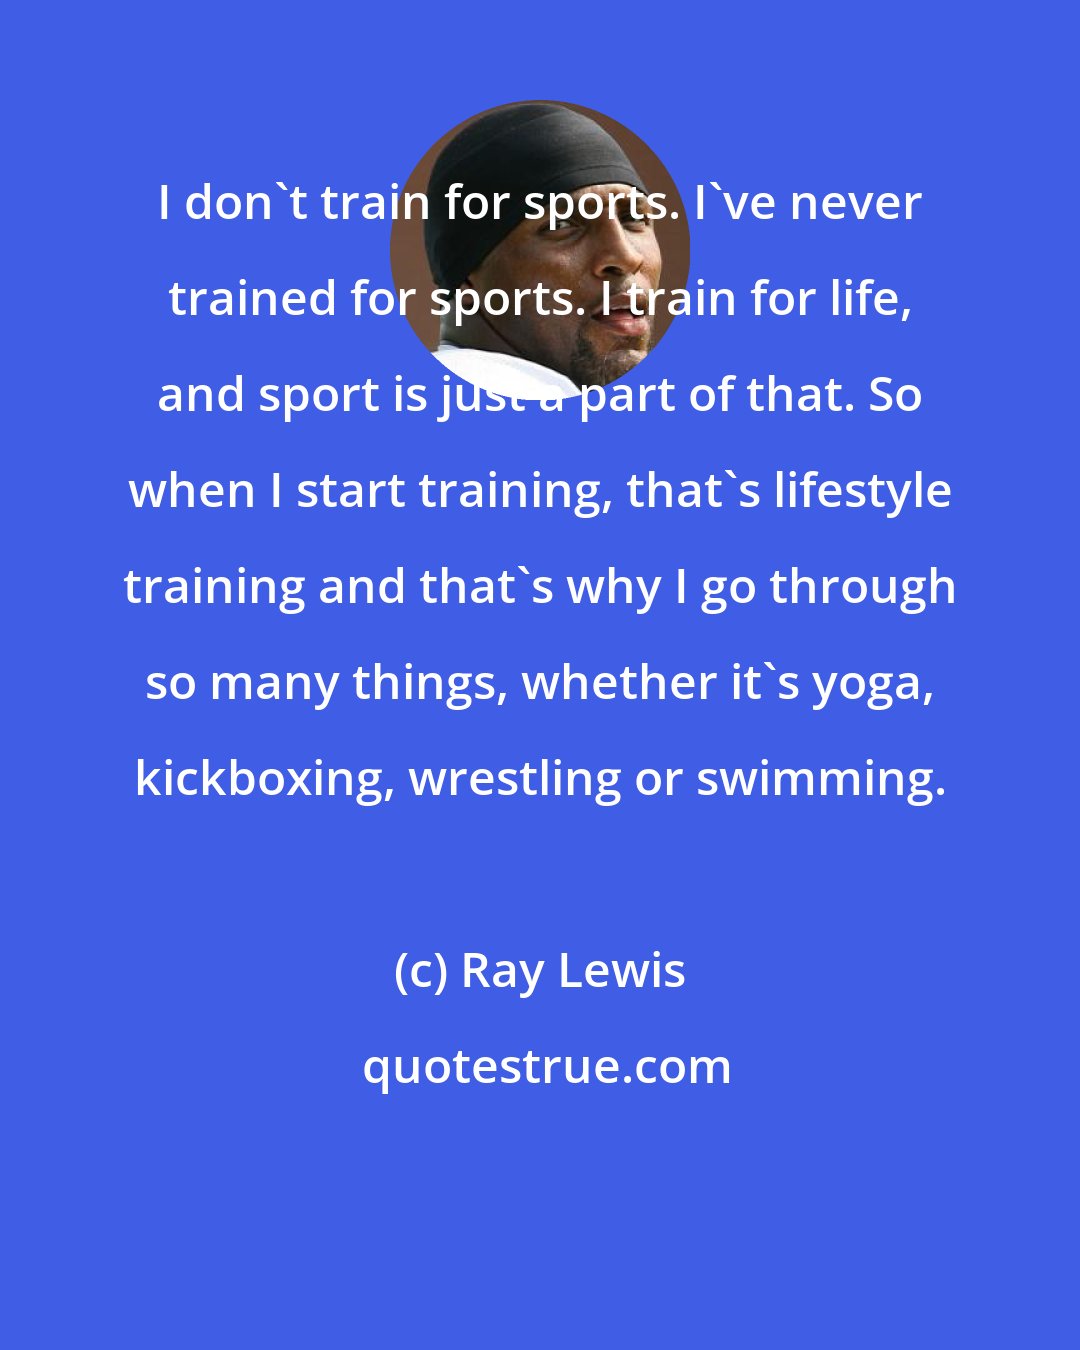 Ray Lewis: I don't train for sports. I've never trained for sports. I train for life, and sport is just a part of that. So when I start training, that's lifestyle training and that's why I go through so many things, whether it's yoga, kickboxing, wrestling or swimming.